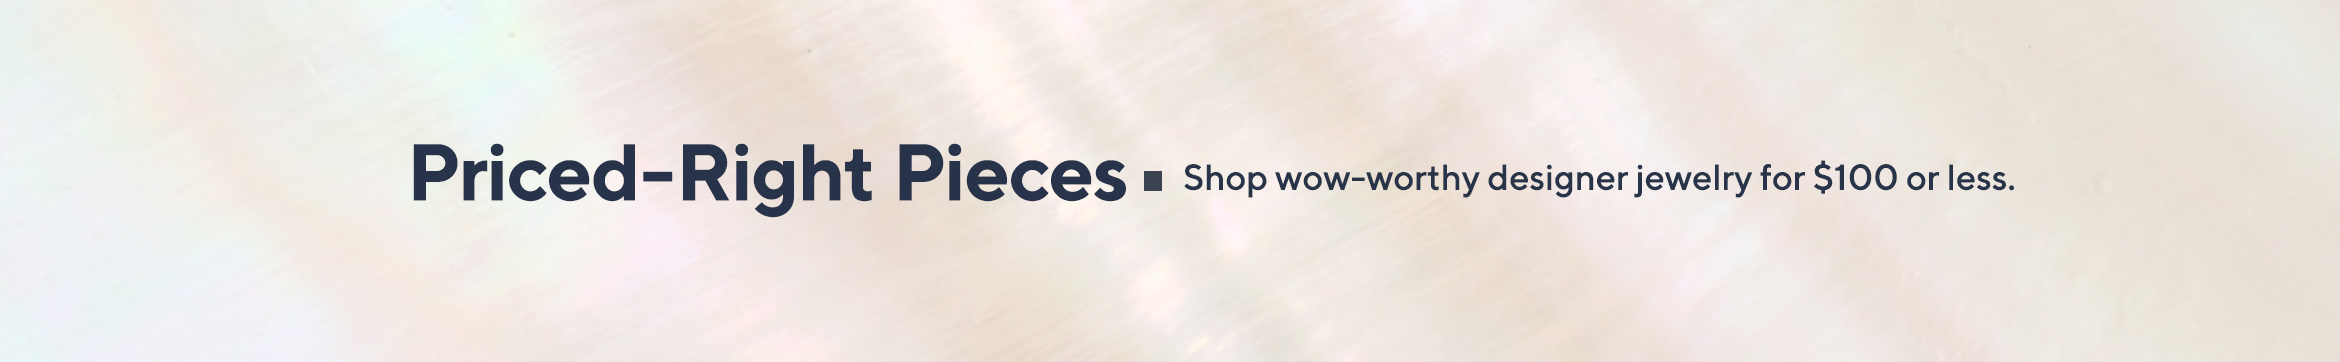 Priced-Right Pieces - Shop wow-worthy designer jewelry for $100 or less